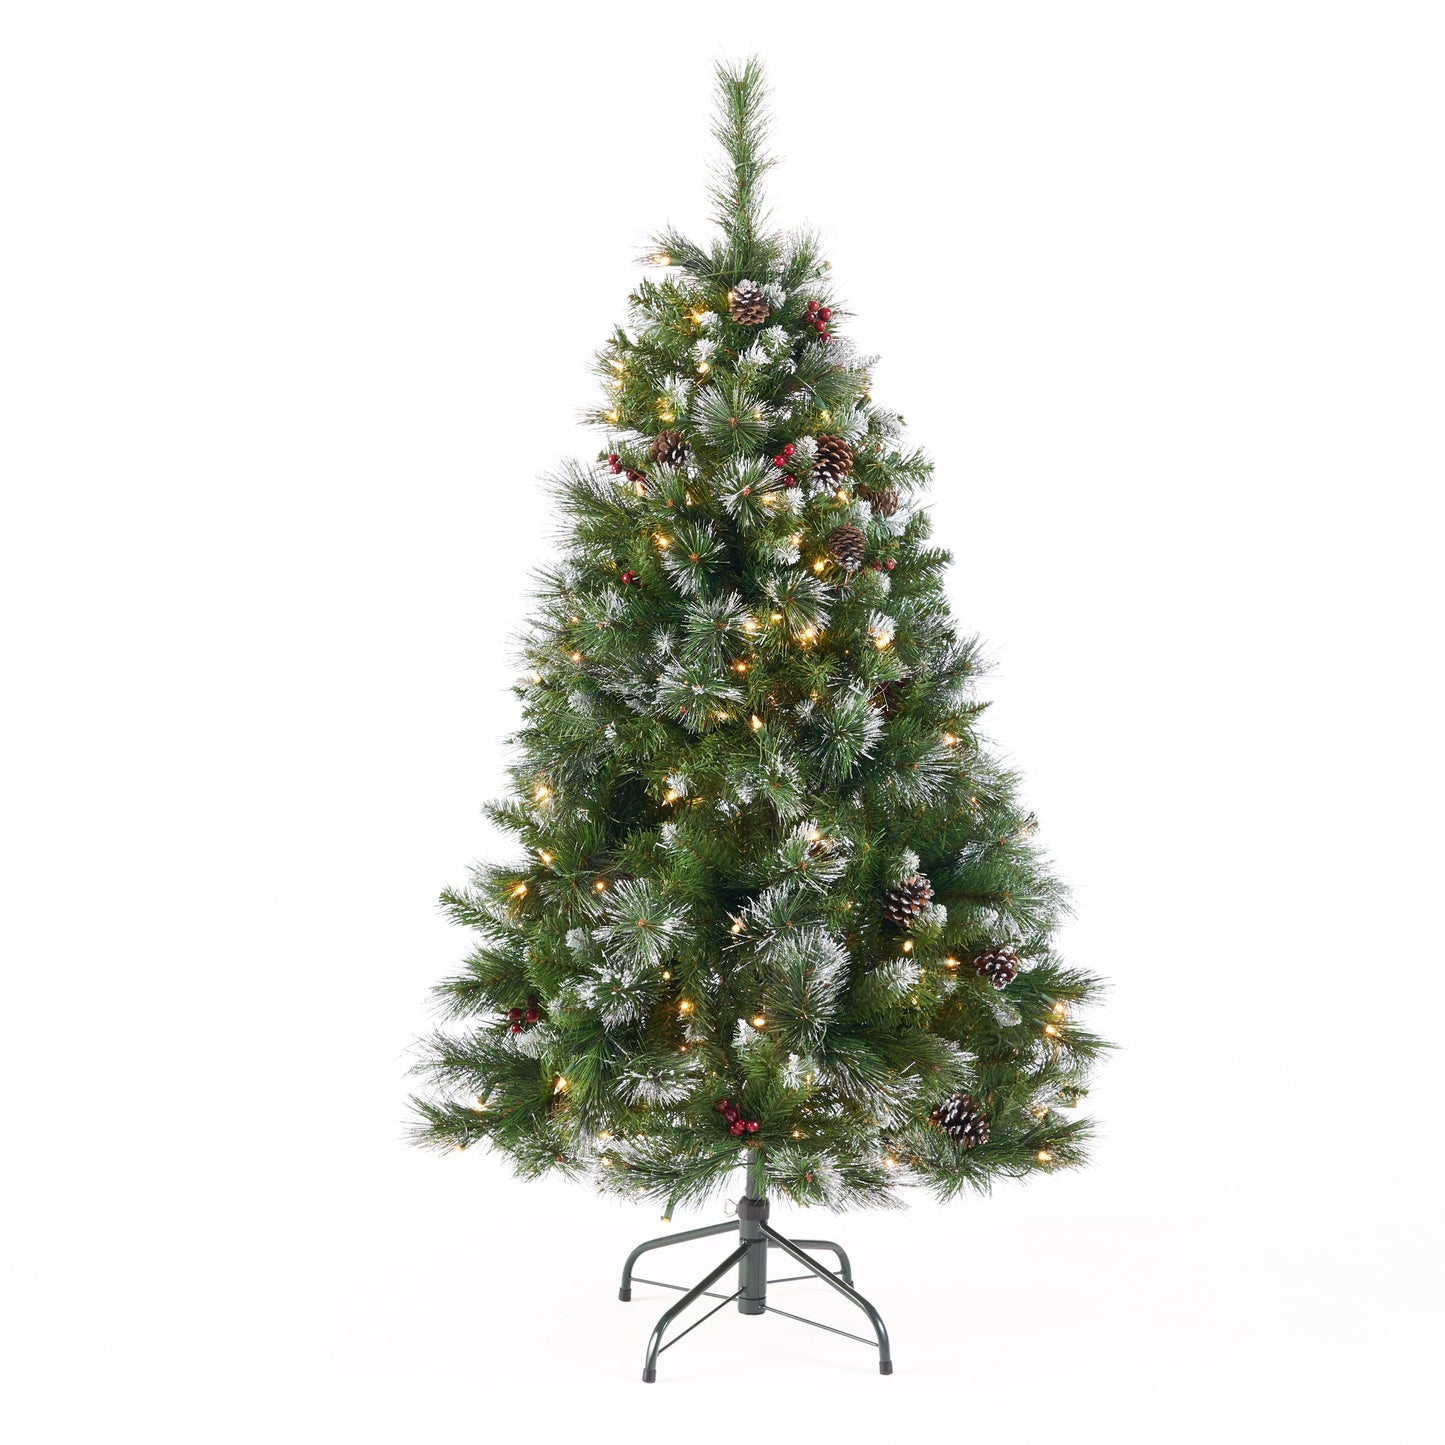 4.5-foot Mixed Spruce Hinged Artificial Christmas Tree with Glitter Branches, Red Berries, and Pinecones